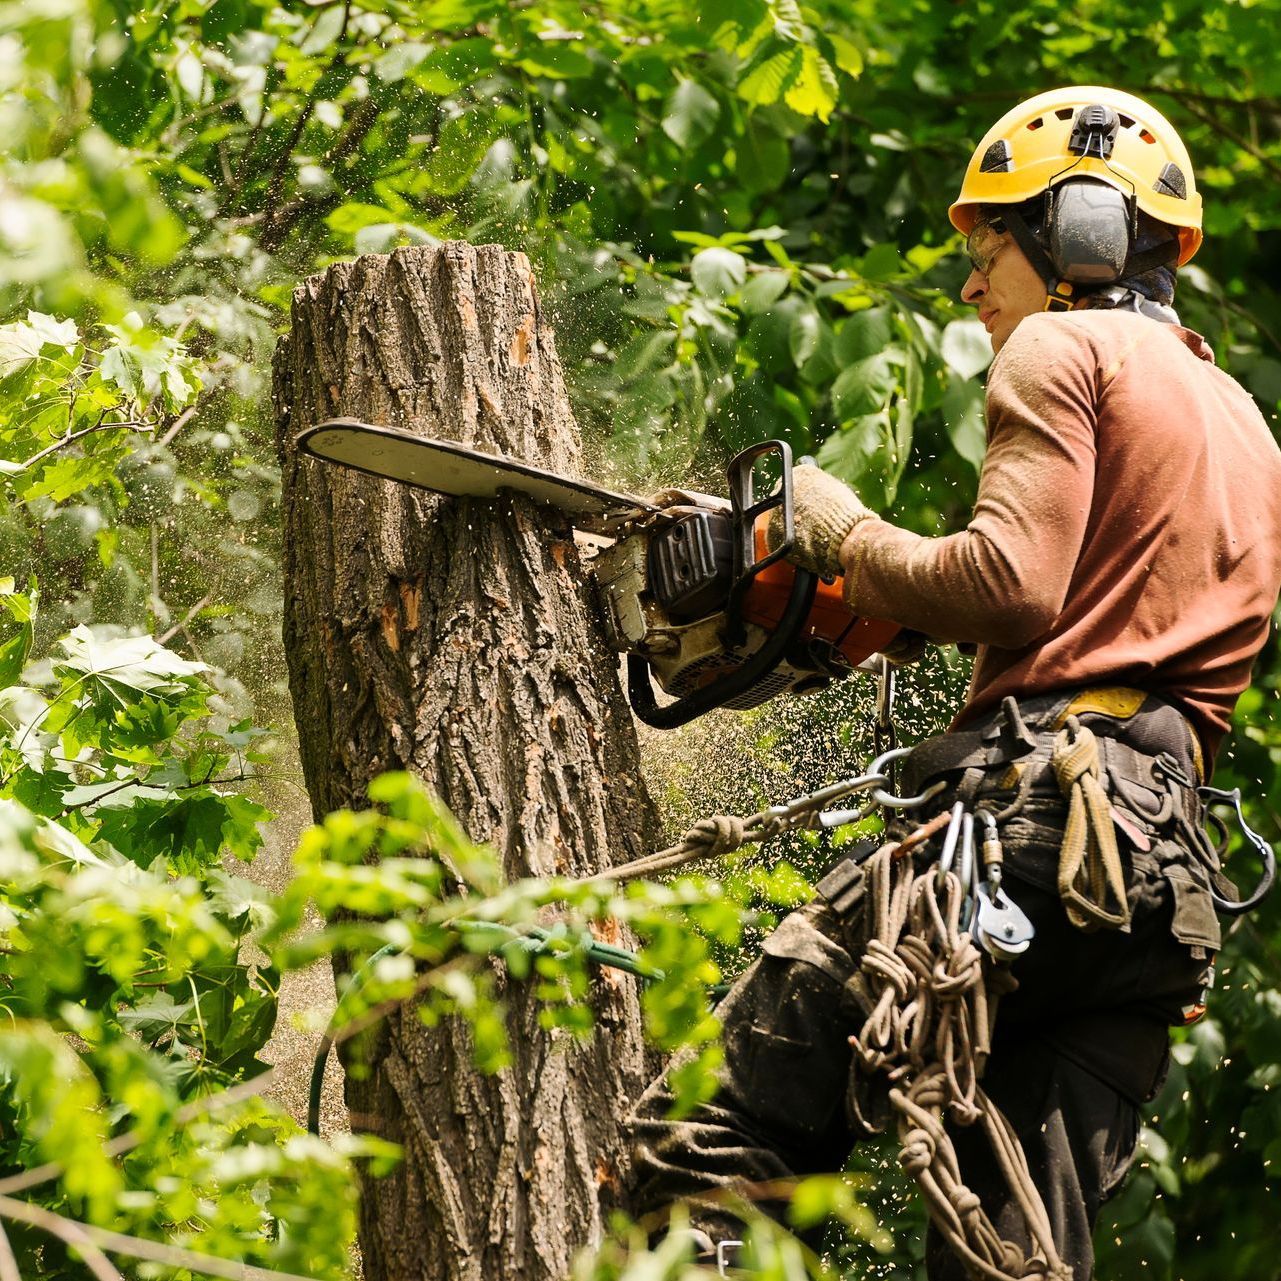 a man wearing a helmet is using a chainsaw to cut a tree